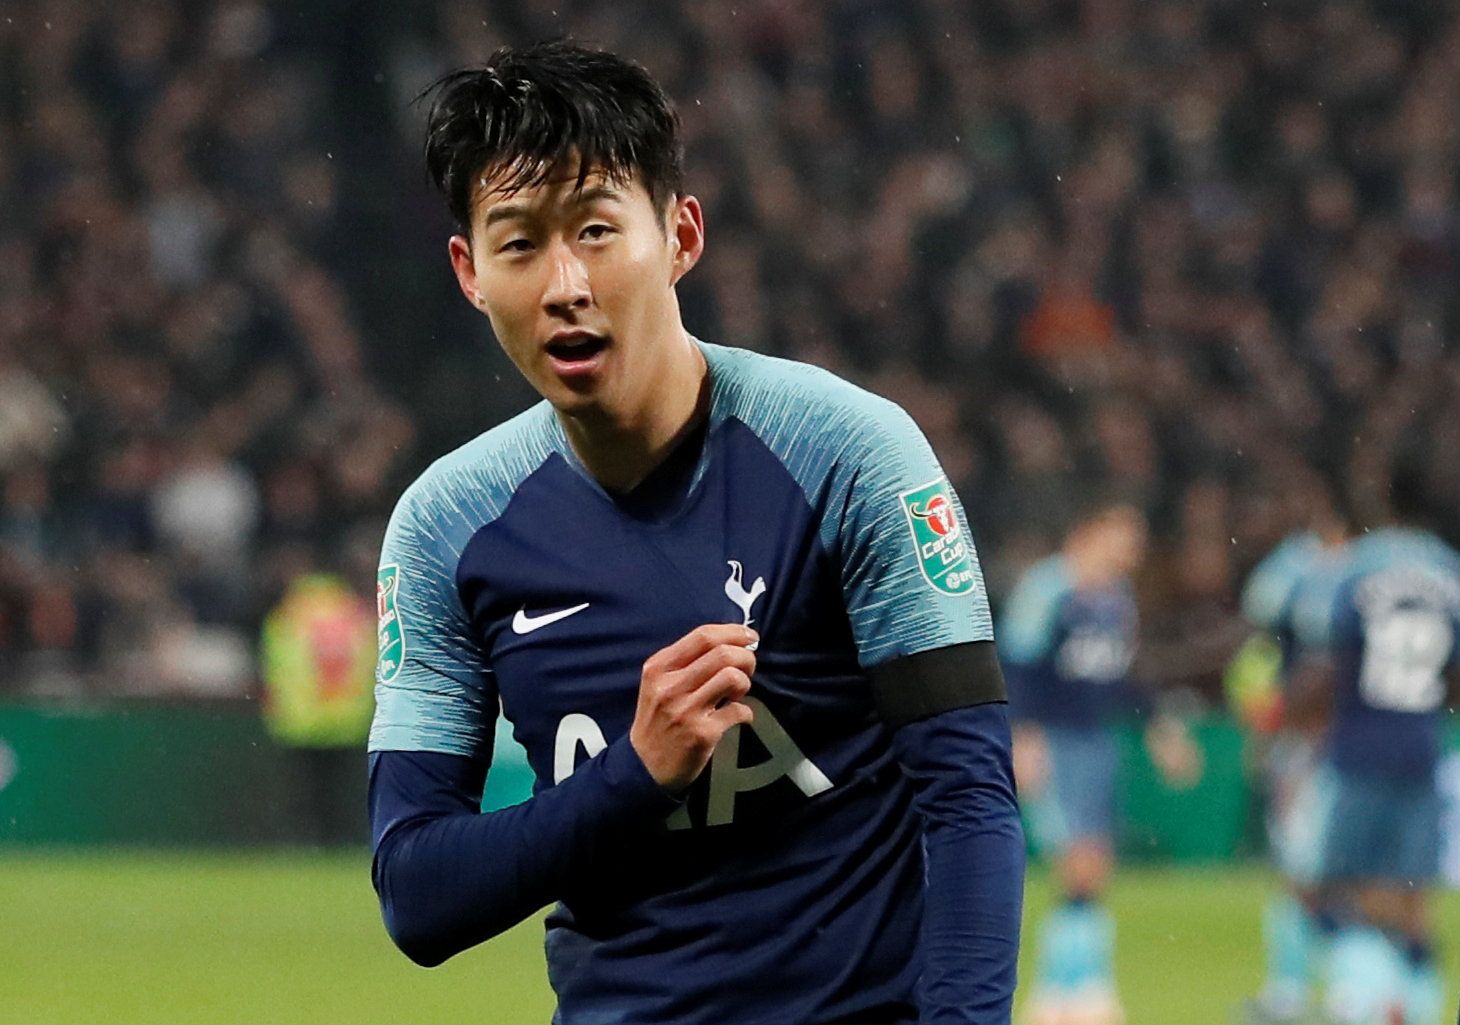 Soccer Football - Carabao Cup Fourth Round - West Ham United v Tottenham Hotspur - London Stadium, London, Britain - October 31, 2018  Tottenham's Son Heung-min celebrates scoring their second goal                  REUTERS/David Klein  EDITORIAL USE ONLY. No use with unauthorized audio, video, data, fixture lists, club/league logos or 